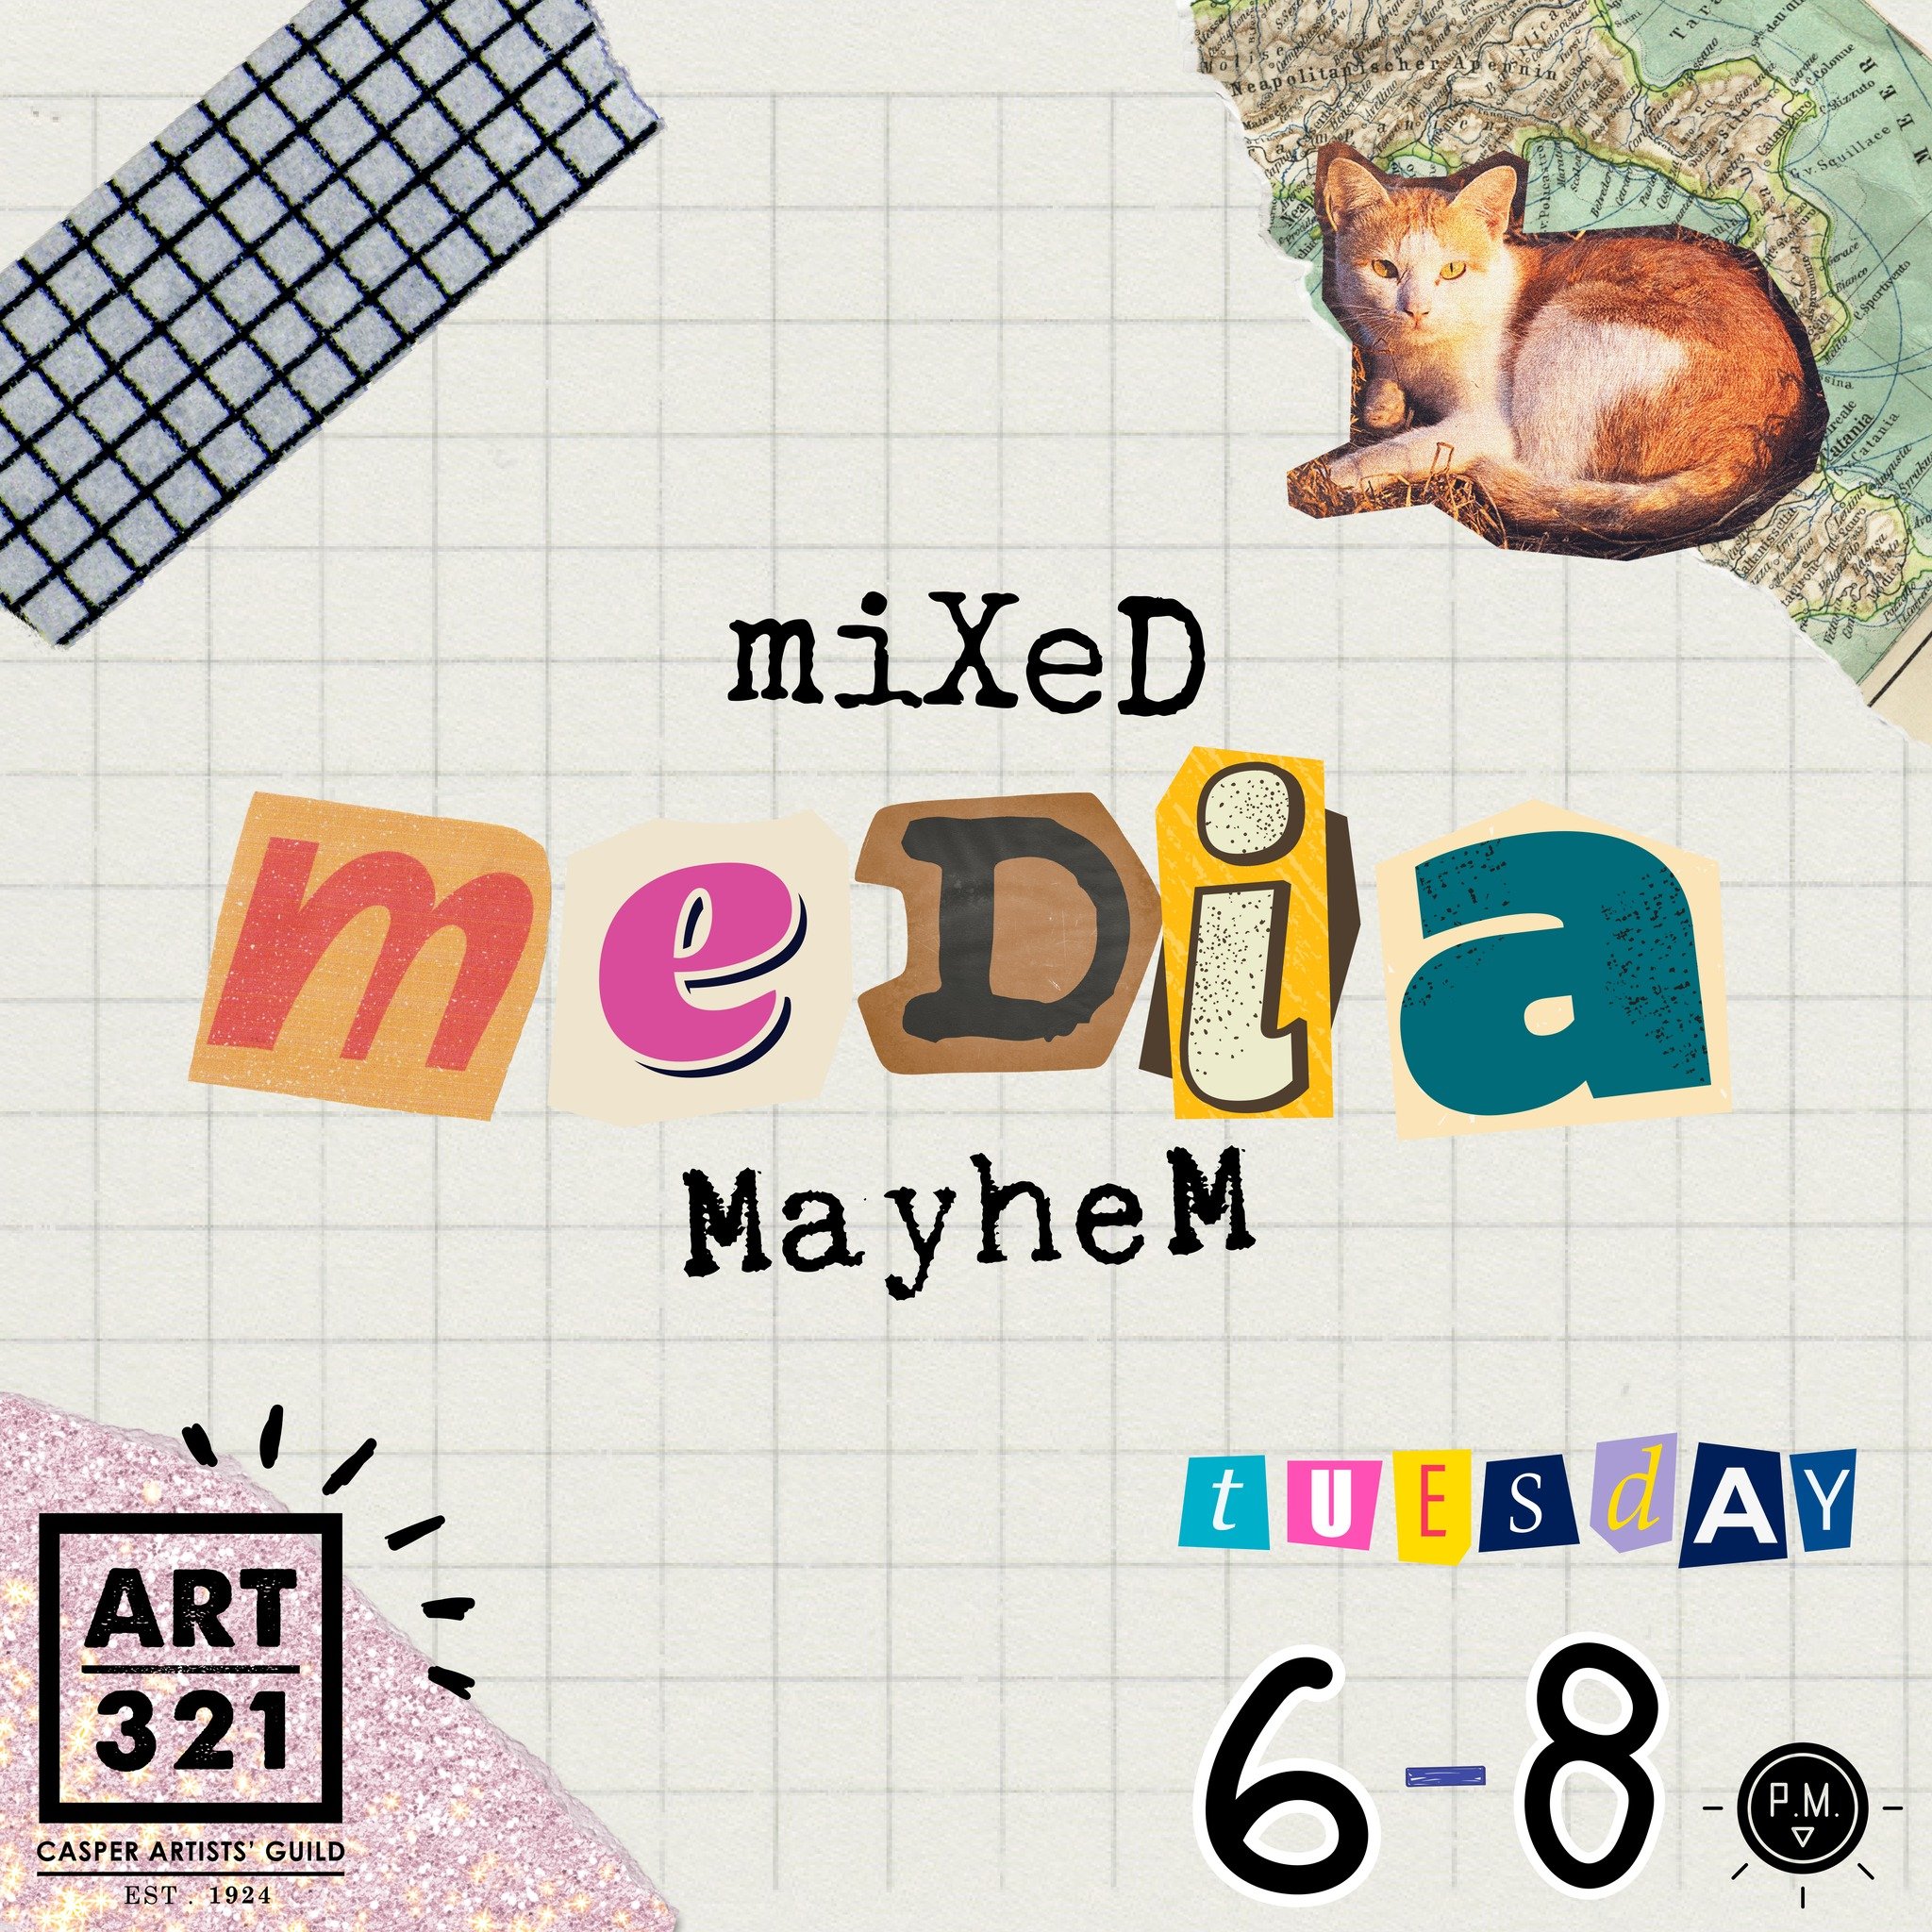 Join our vibrant Mixed Media Mayhem group and discover the joy of artistic experimentation! With no rules and all mediums welcome 

Join us every Tuesday from 6pm - 8pm
$5 for Members
$10 for Non-Members

Bring your creativity and let's make Tuesdays